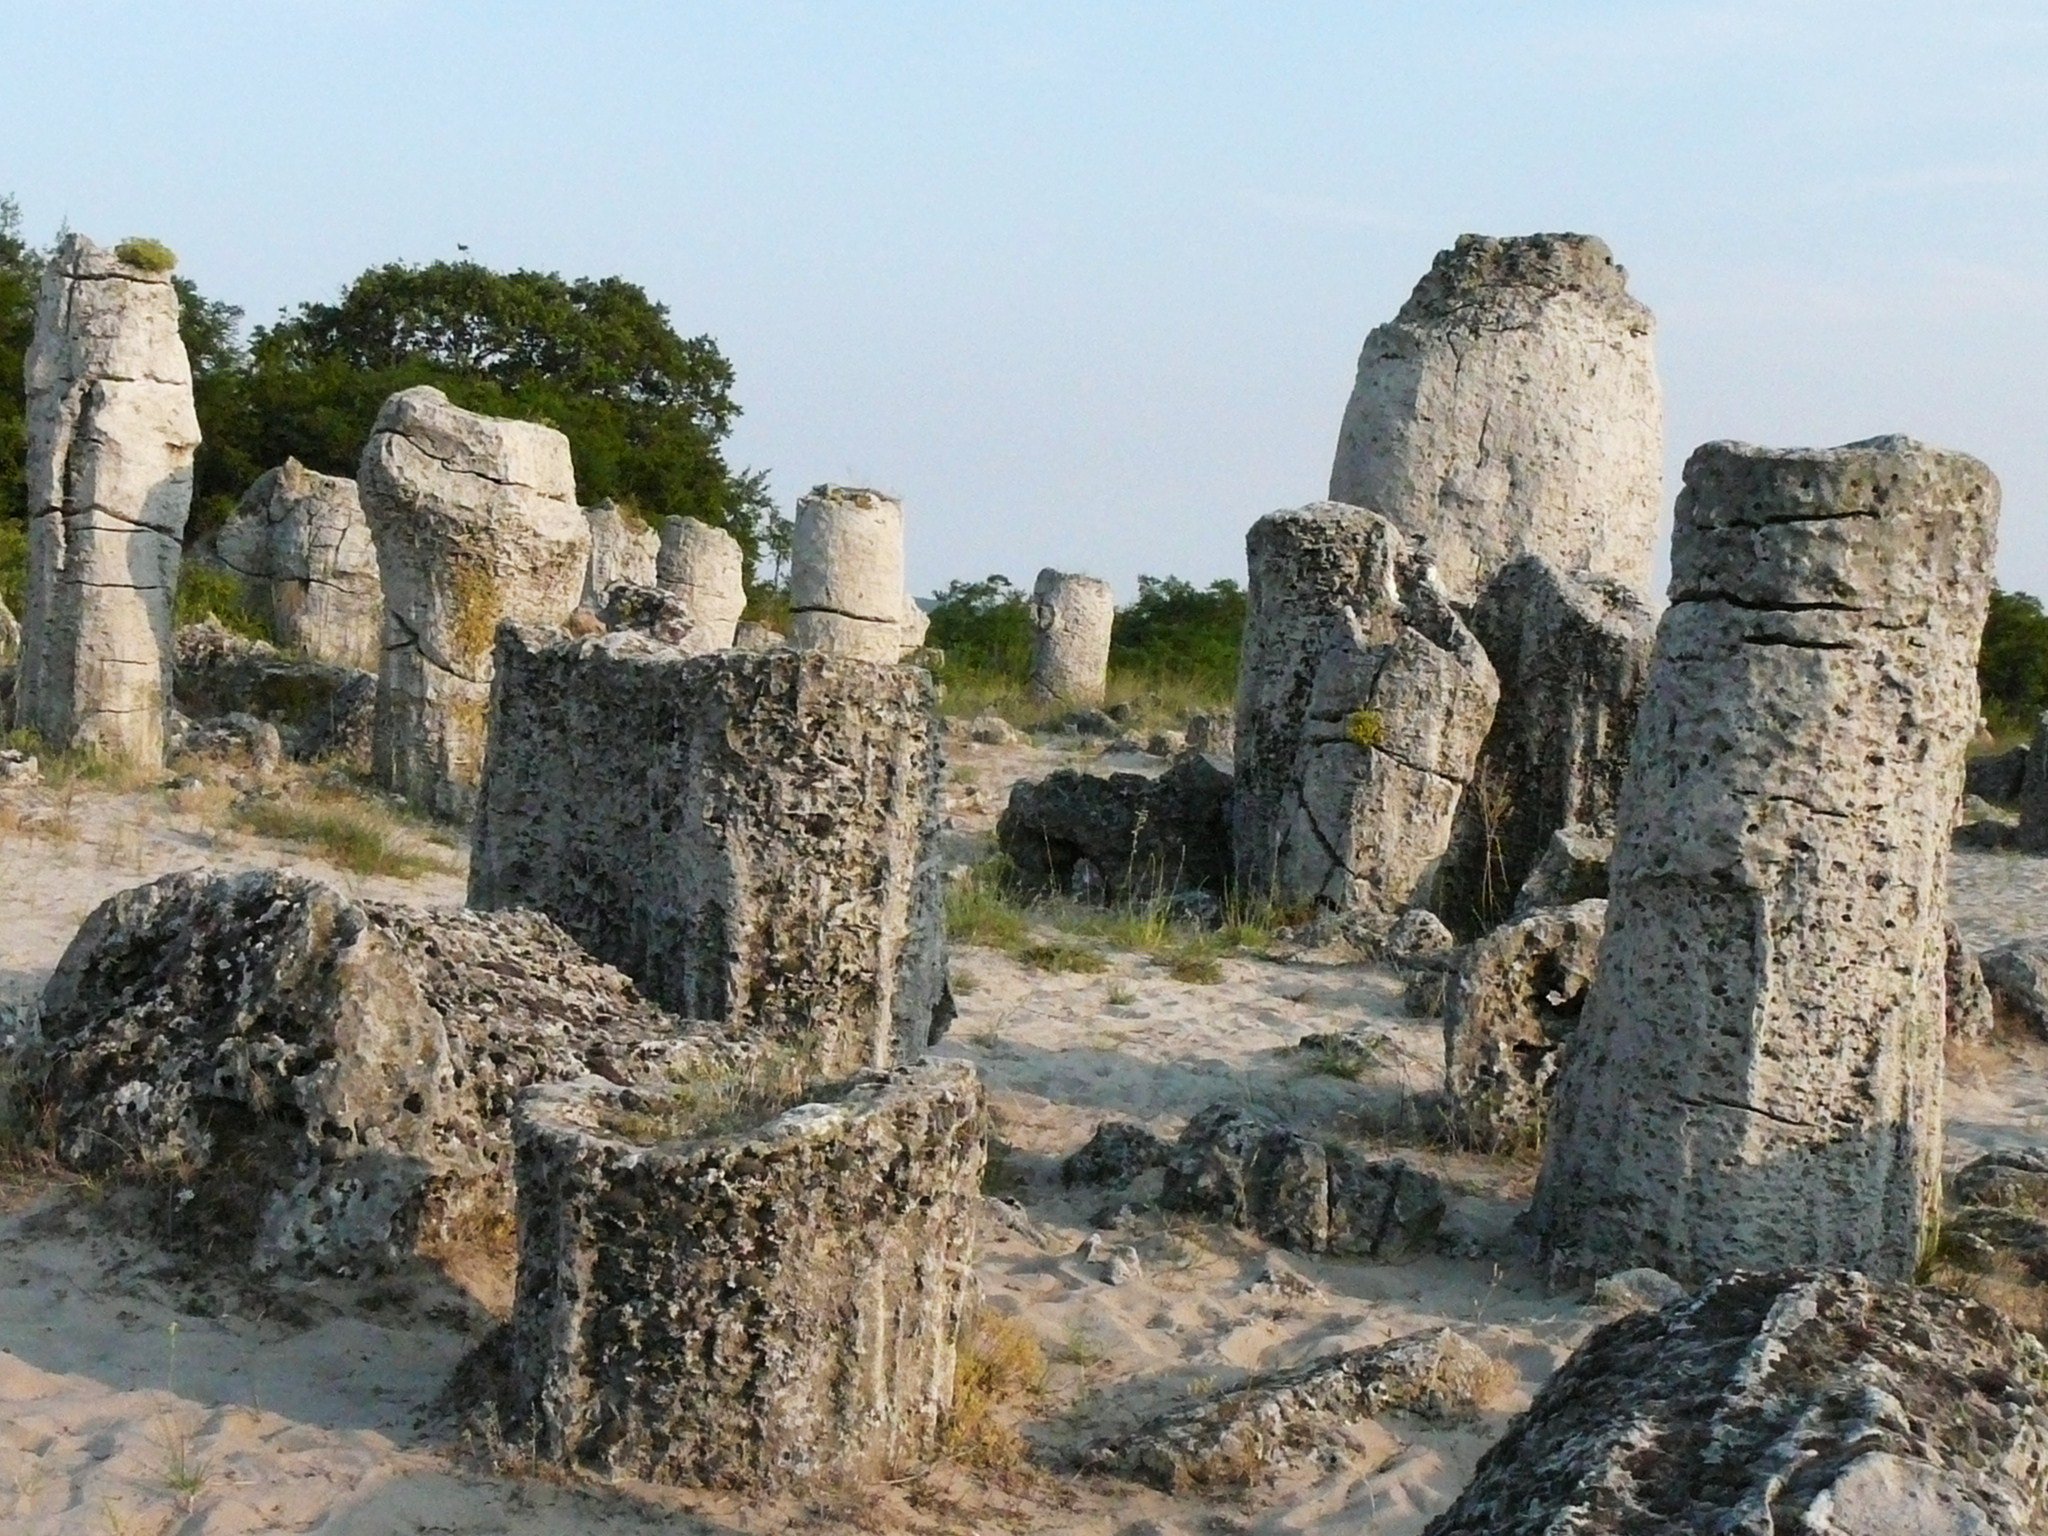 The stone forest